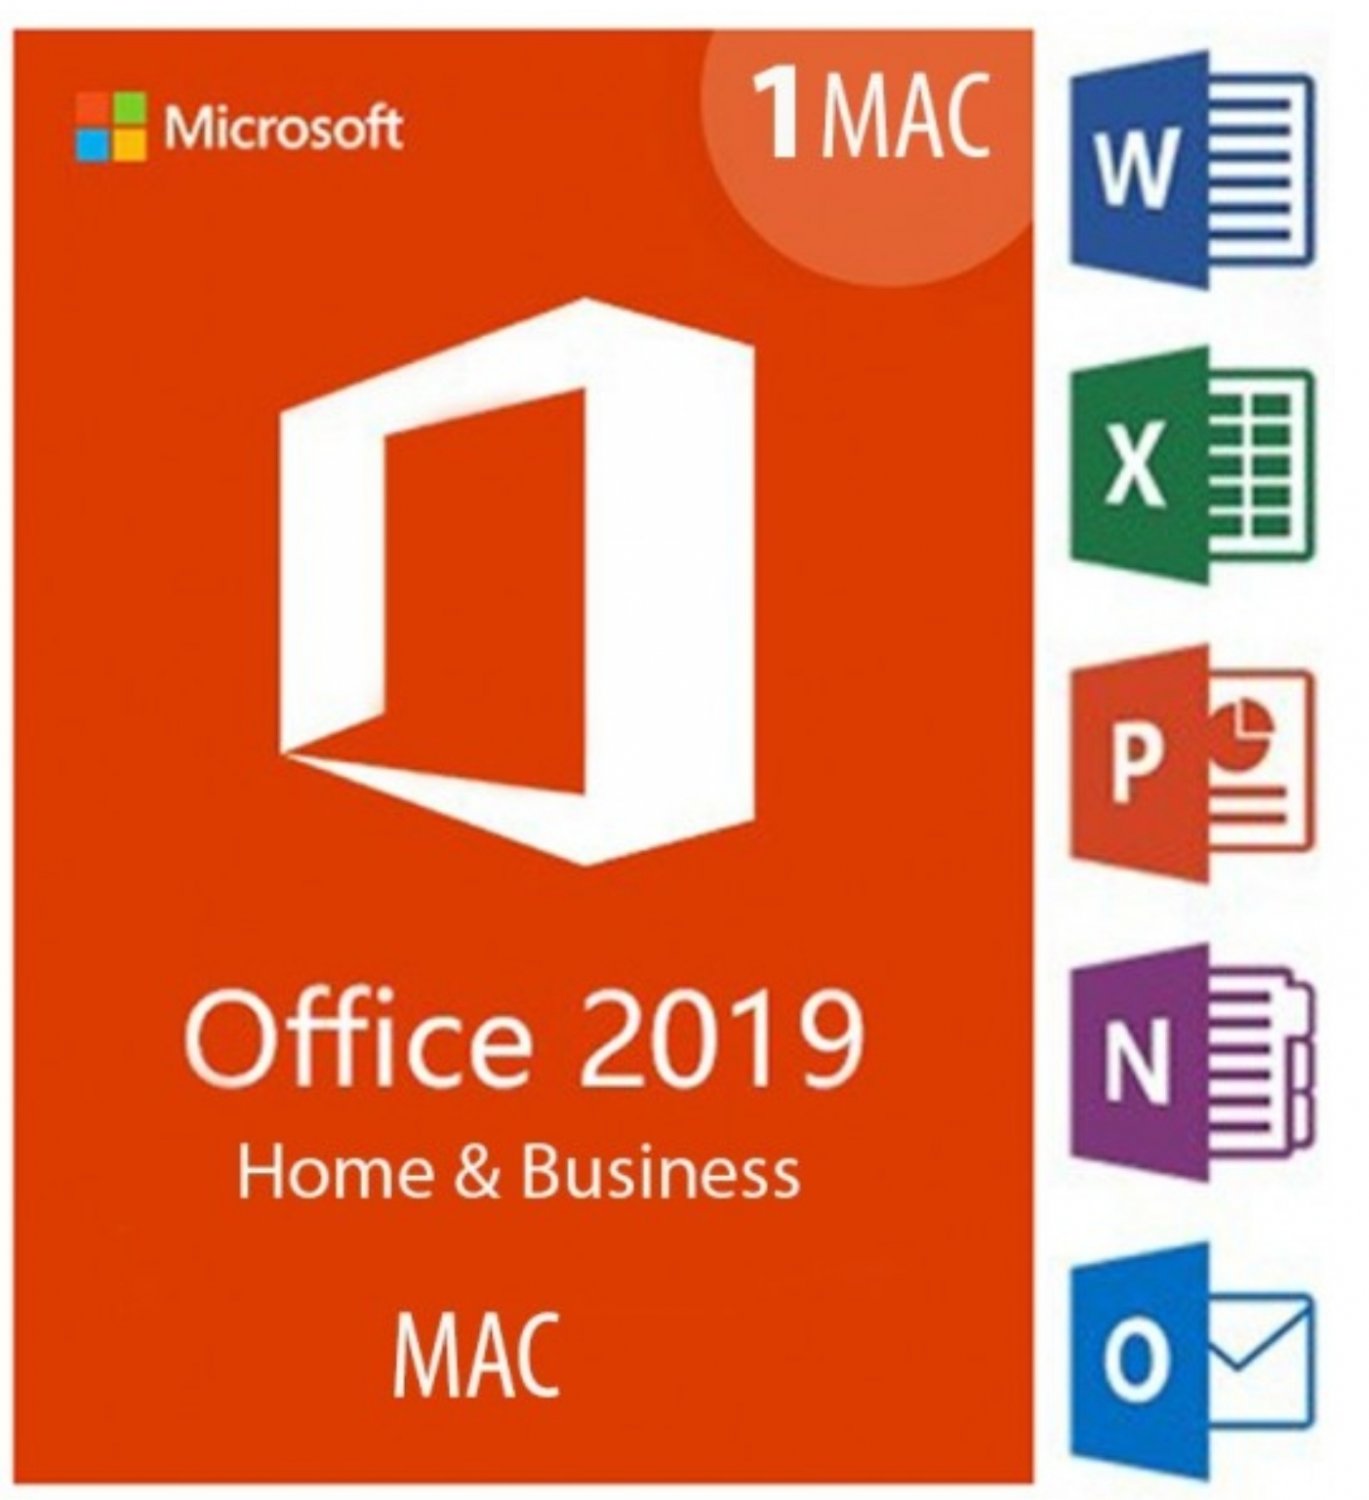 Microsoft Office 2019 Home And Business for Mac ⭕ 1 Devices ⭕ Lifetime